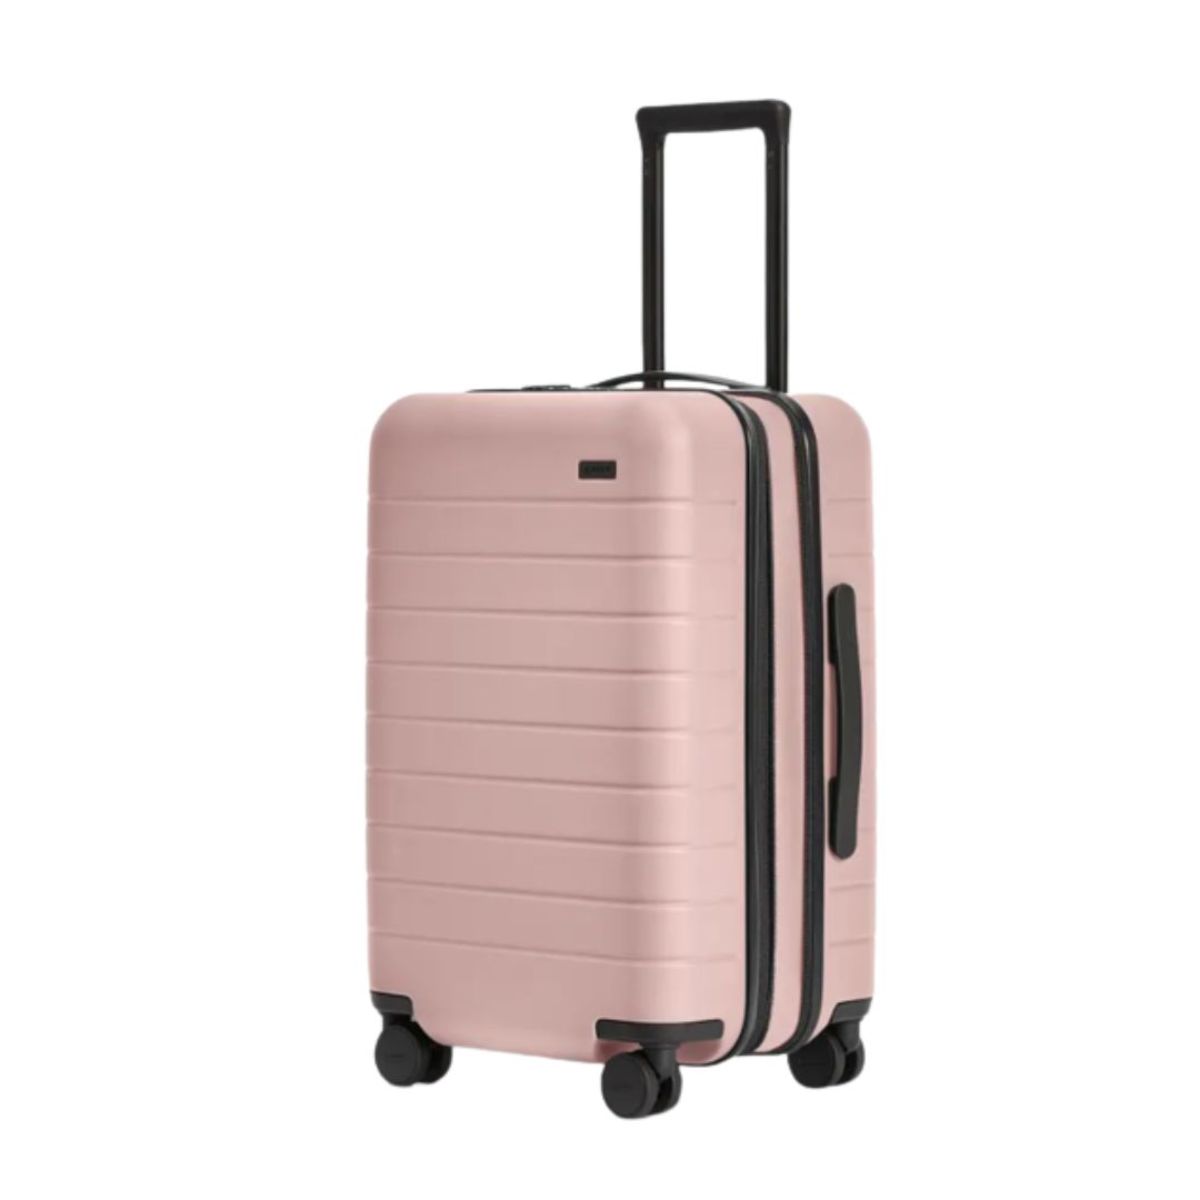 Away luggage is on rare sale ahead of Black Friday - TheStreet